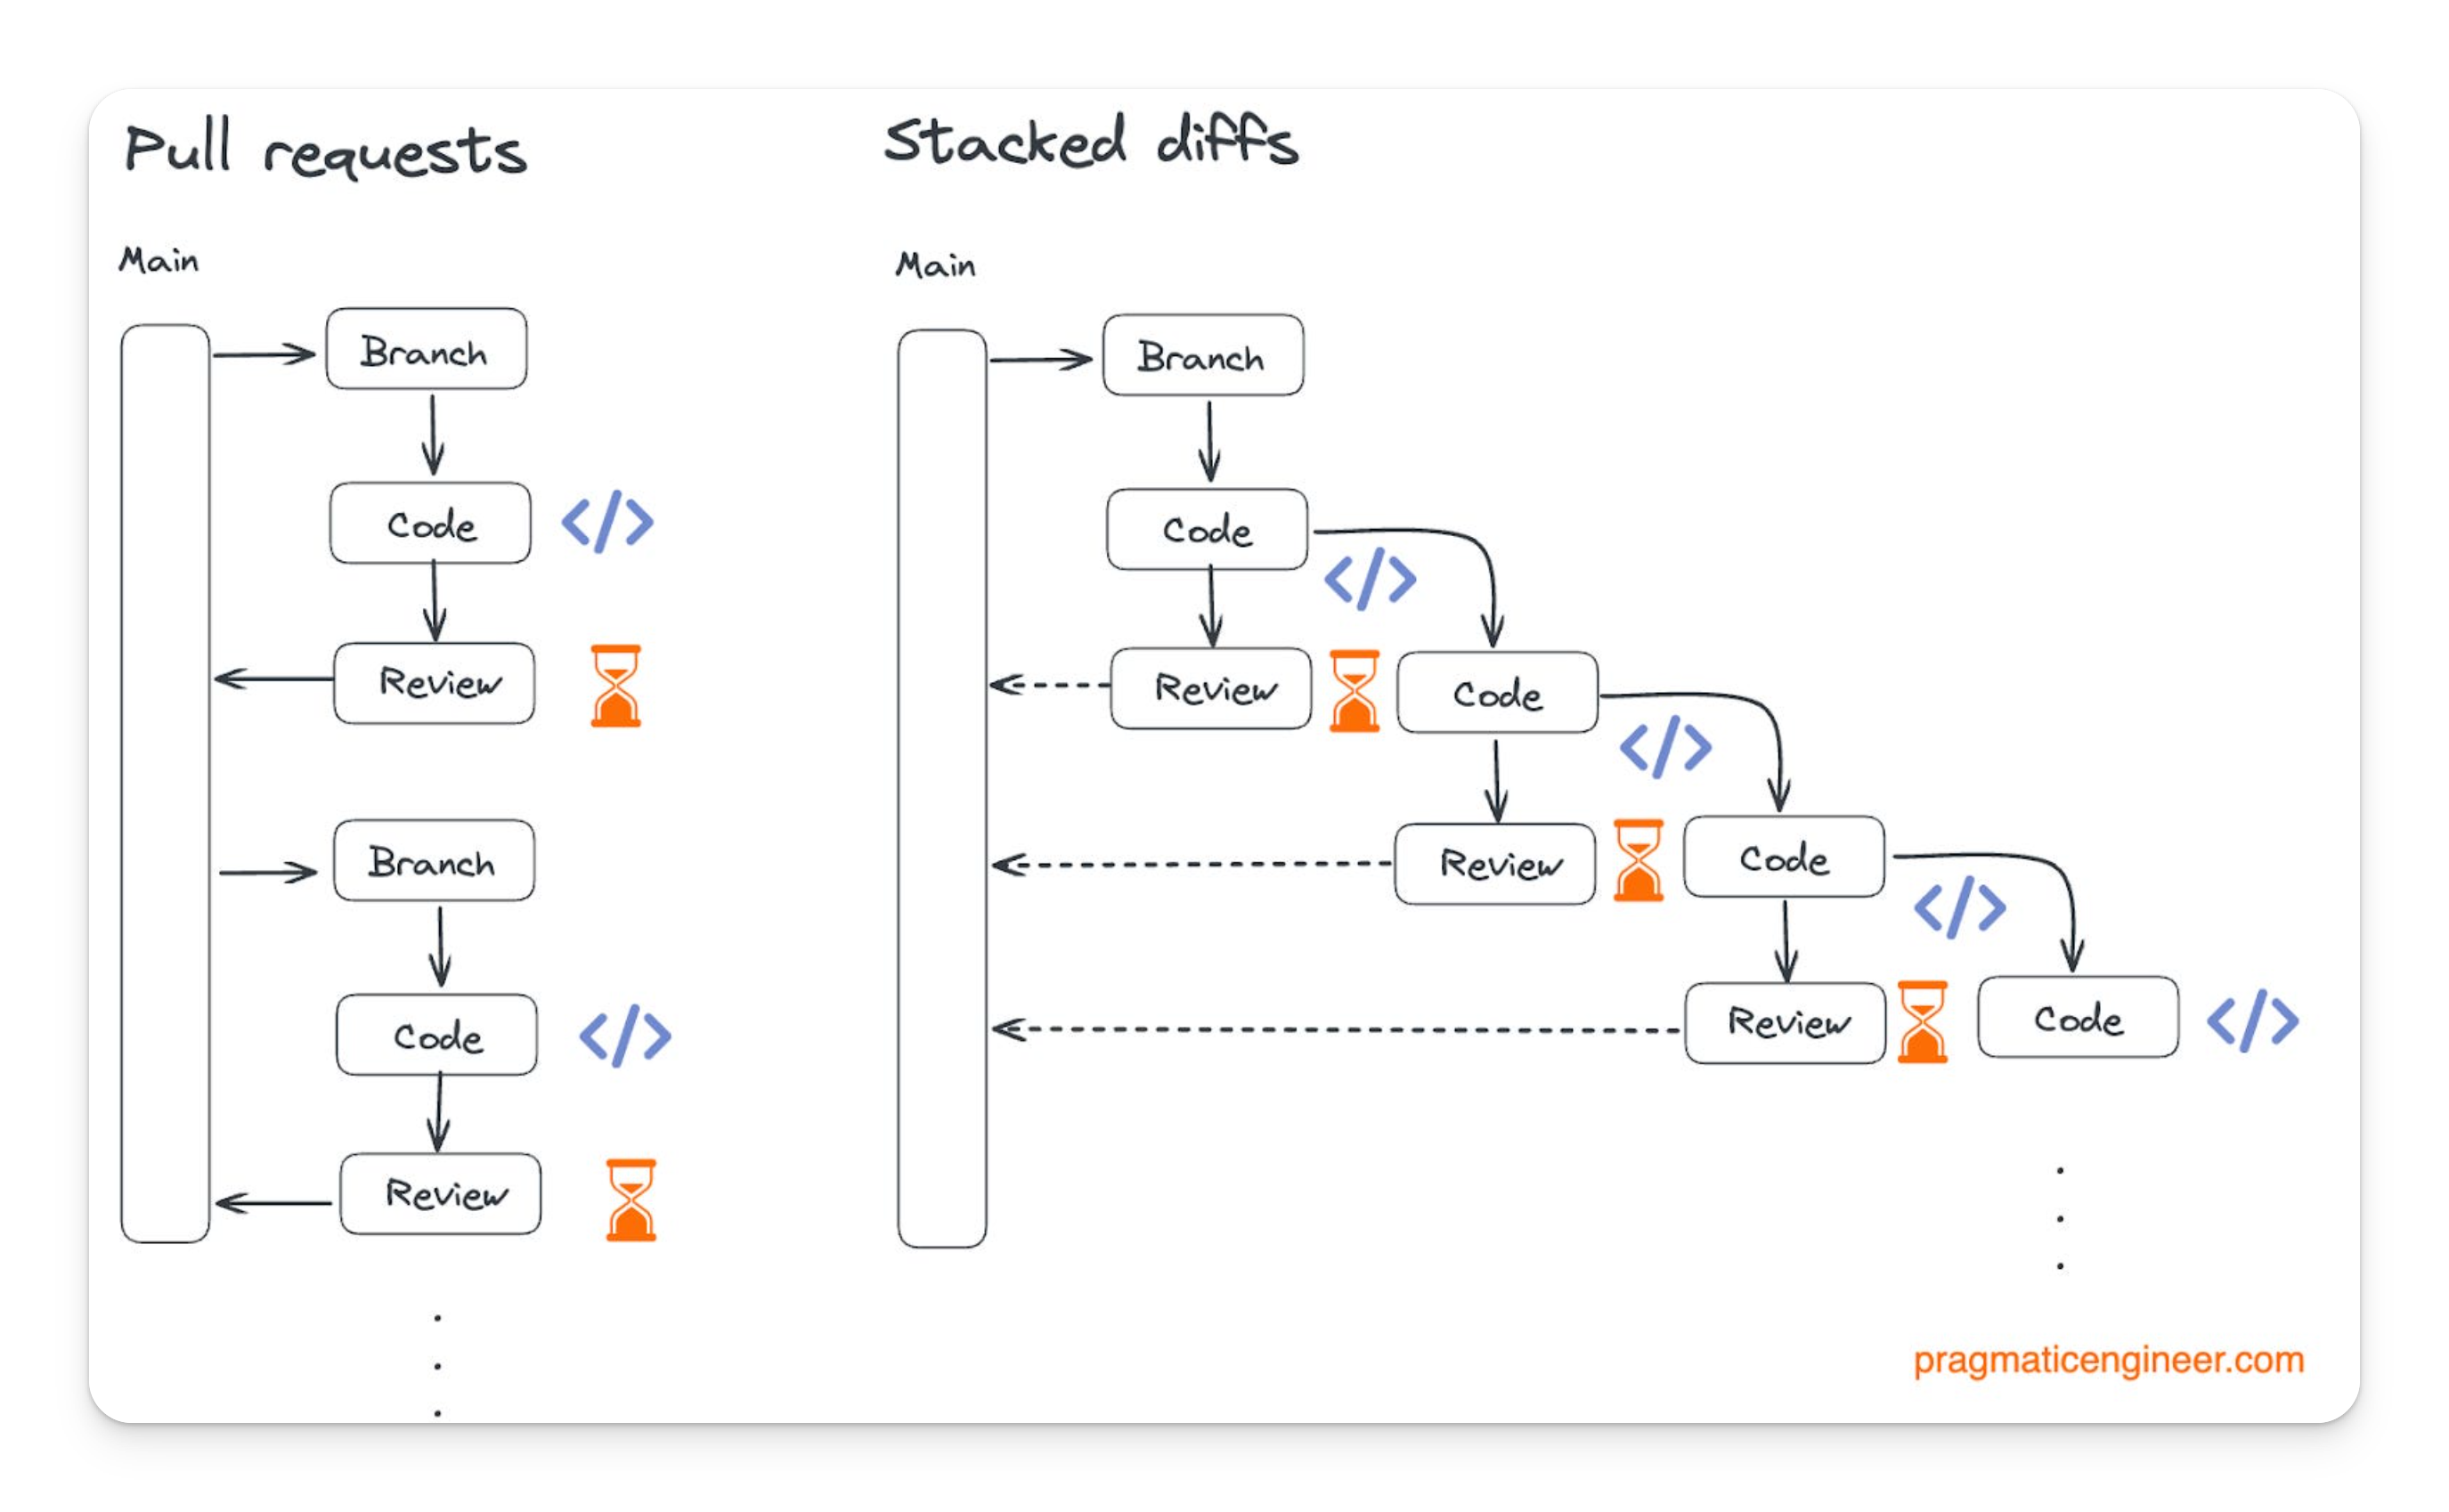 Stacked diffs, also known as stacked changes or stacked pull requests, is a workflow concept that involves stacking a series of small, dependent changes atop one another. This method allows developers to review and merge small changes independently, making the code review process more efficient and manageable.